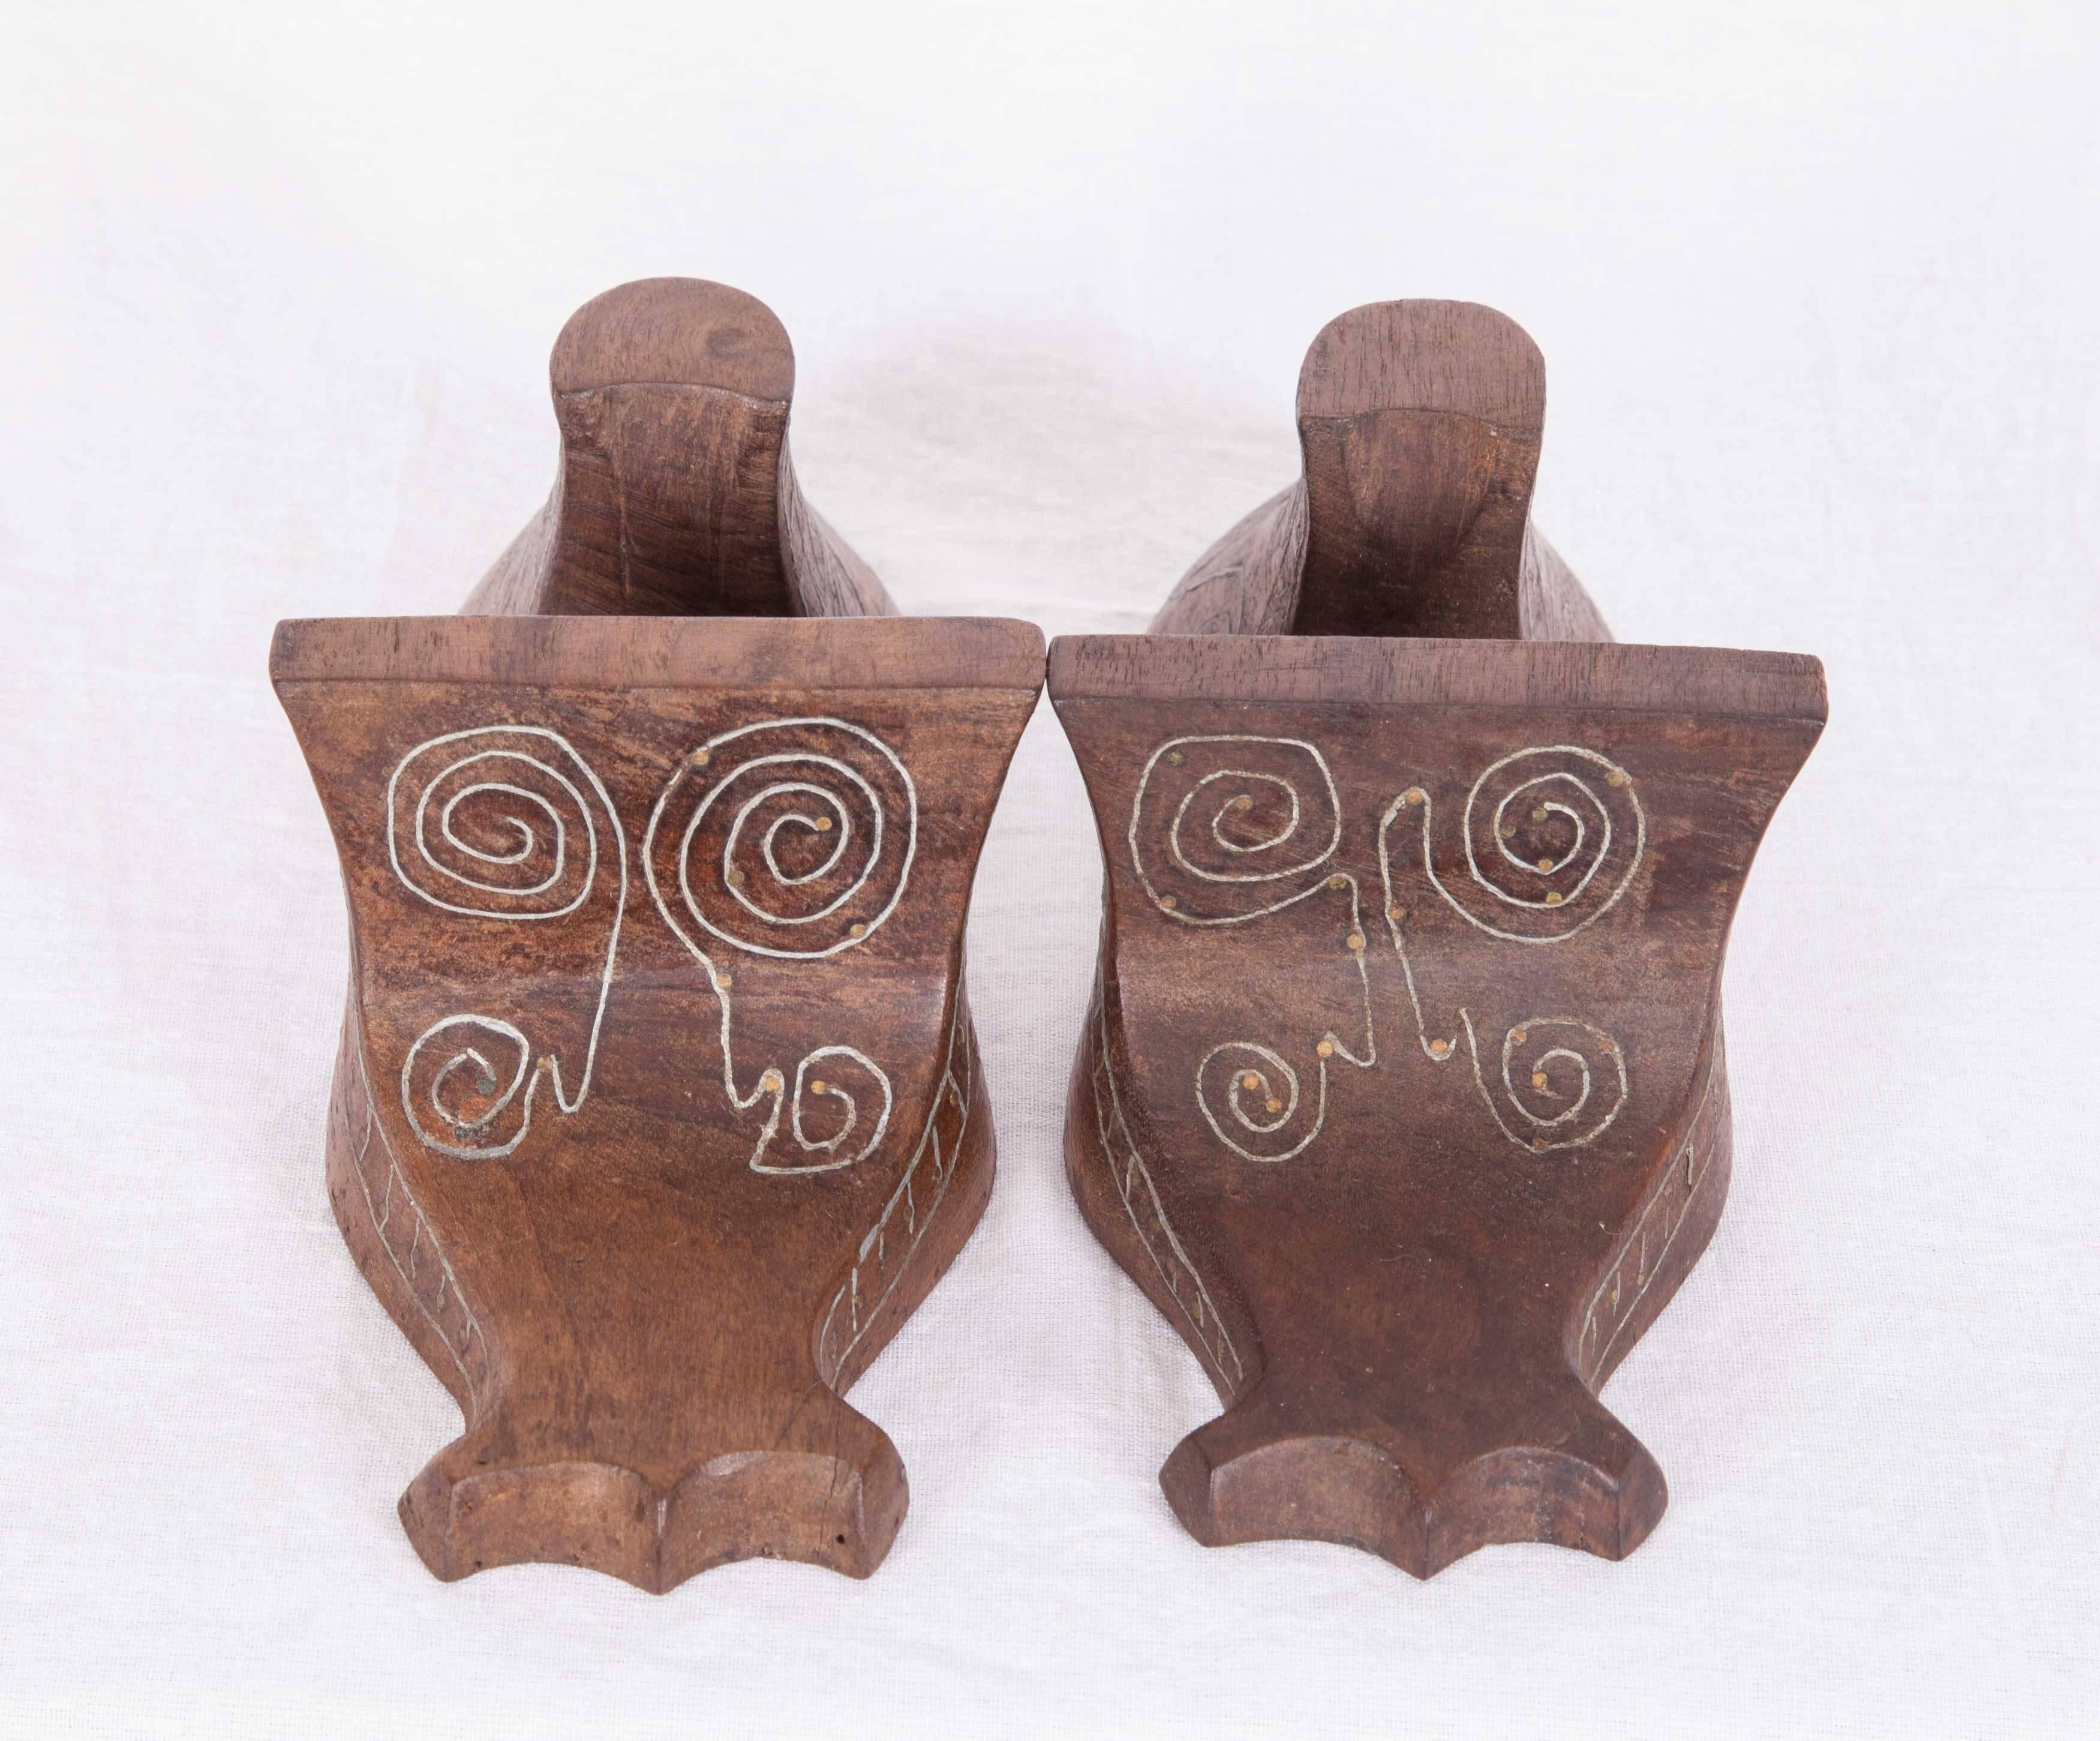 Carved Late 19th-Early 20th Century Ottoman Turkish Bath Clogs ‘Nalin in Turkish’ For Sale